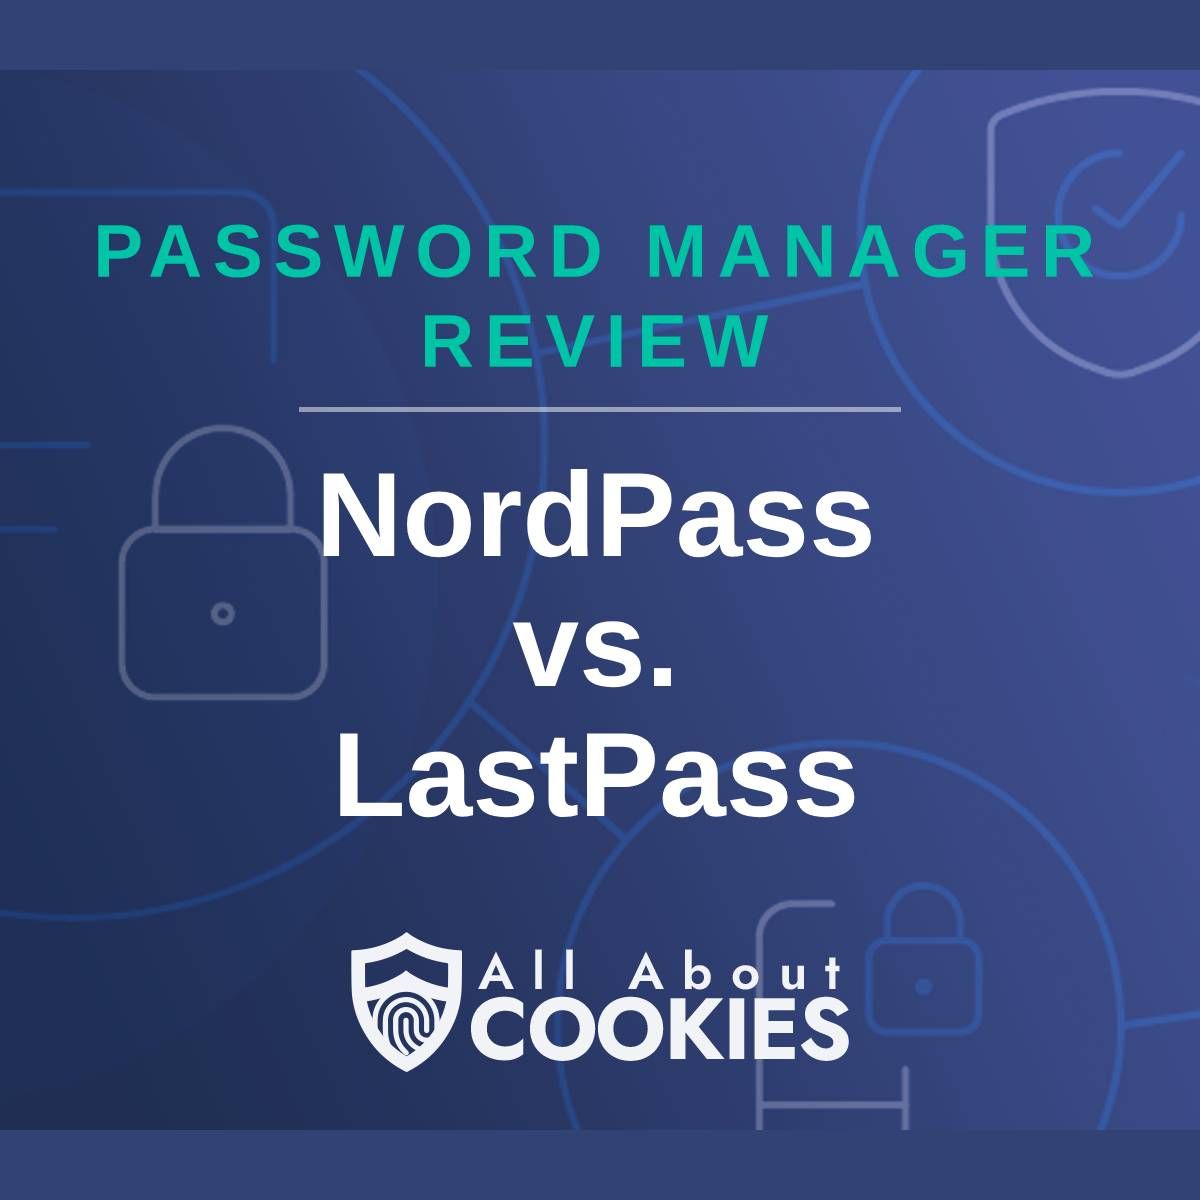 A blue background with images of locks and shields with the text "Password Manager Review NordPass vs. LastPass" and the All About Cookies logo. 